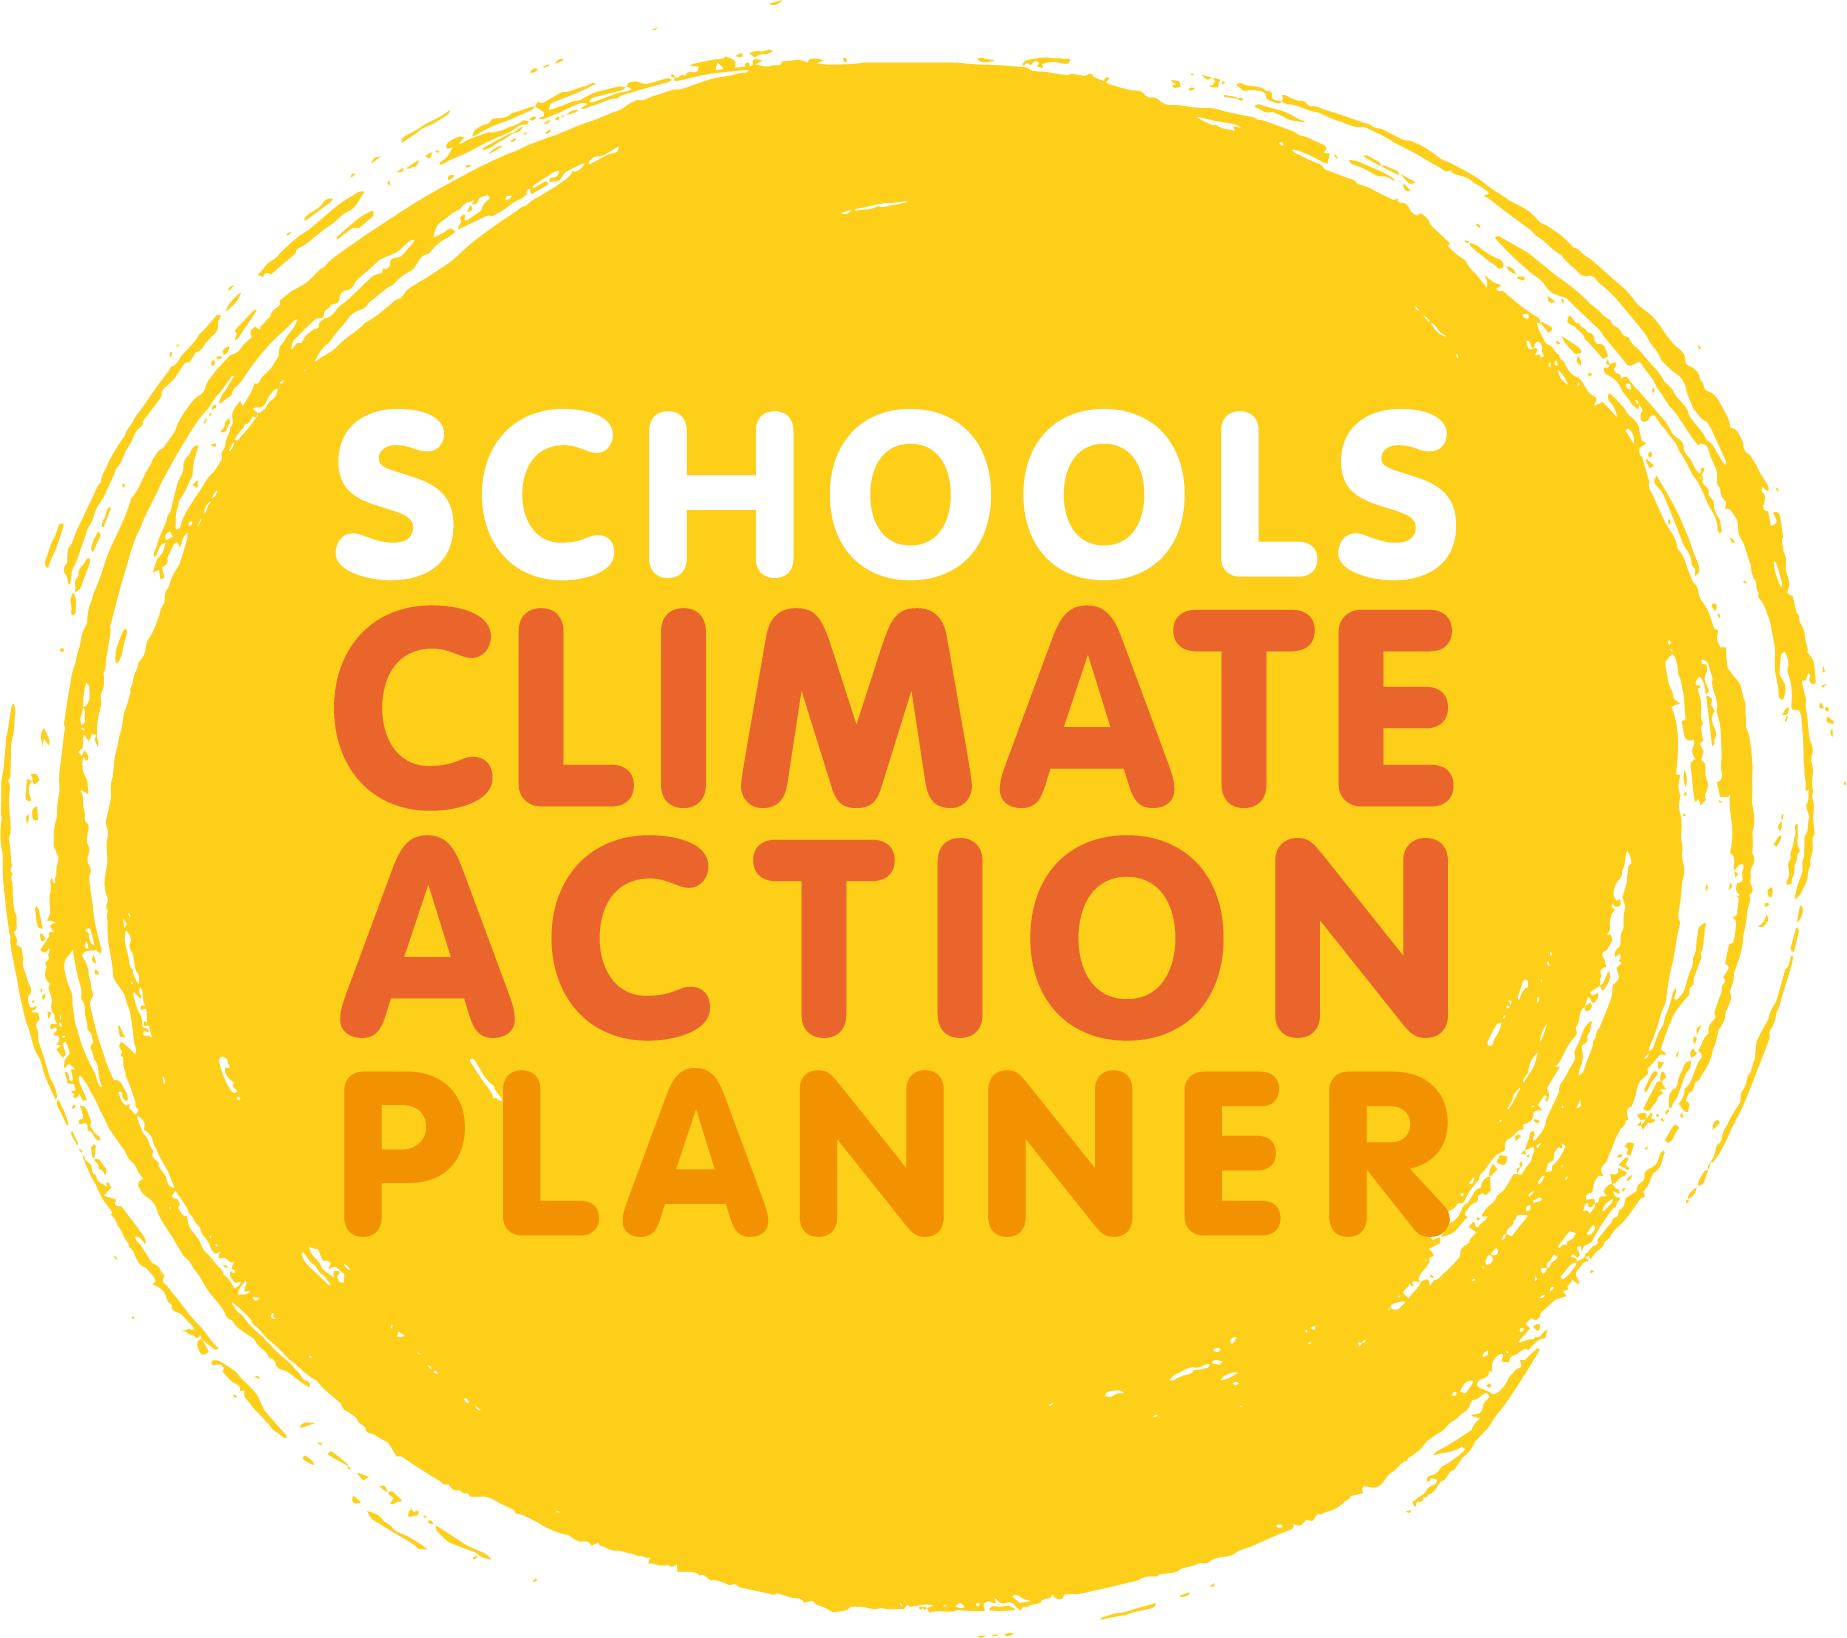 Schools Climate Action Planner